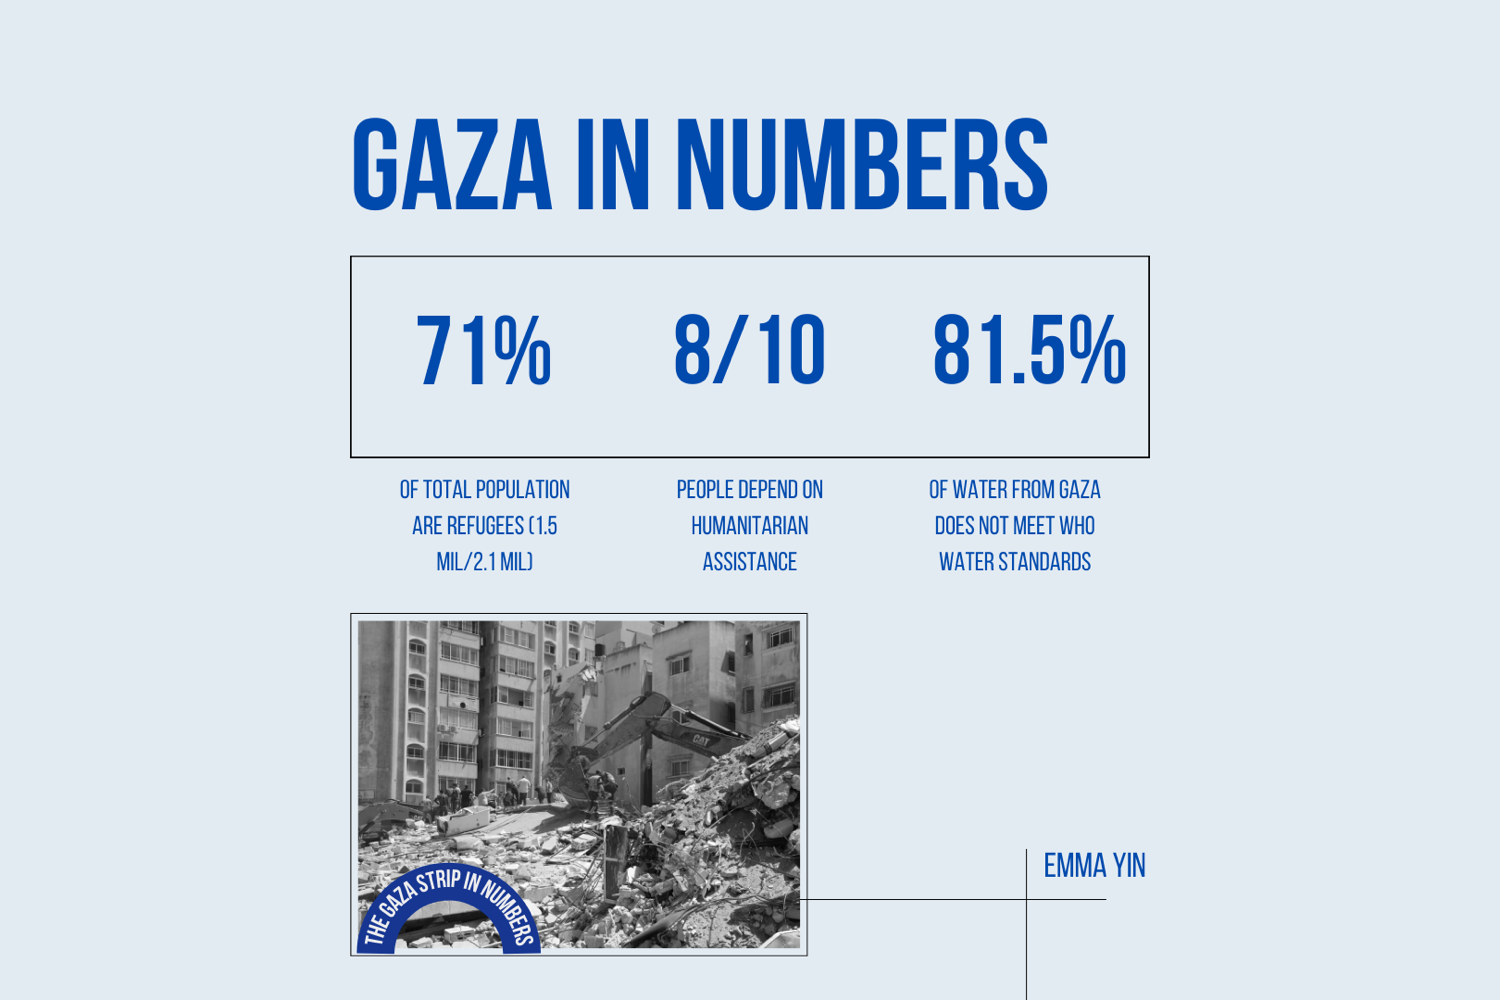 Citizens in Gaza live in impoverishment and their standard of living does not meet World Health Organization standards.